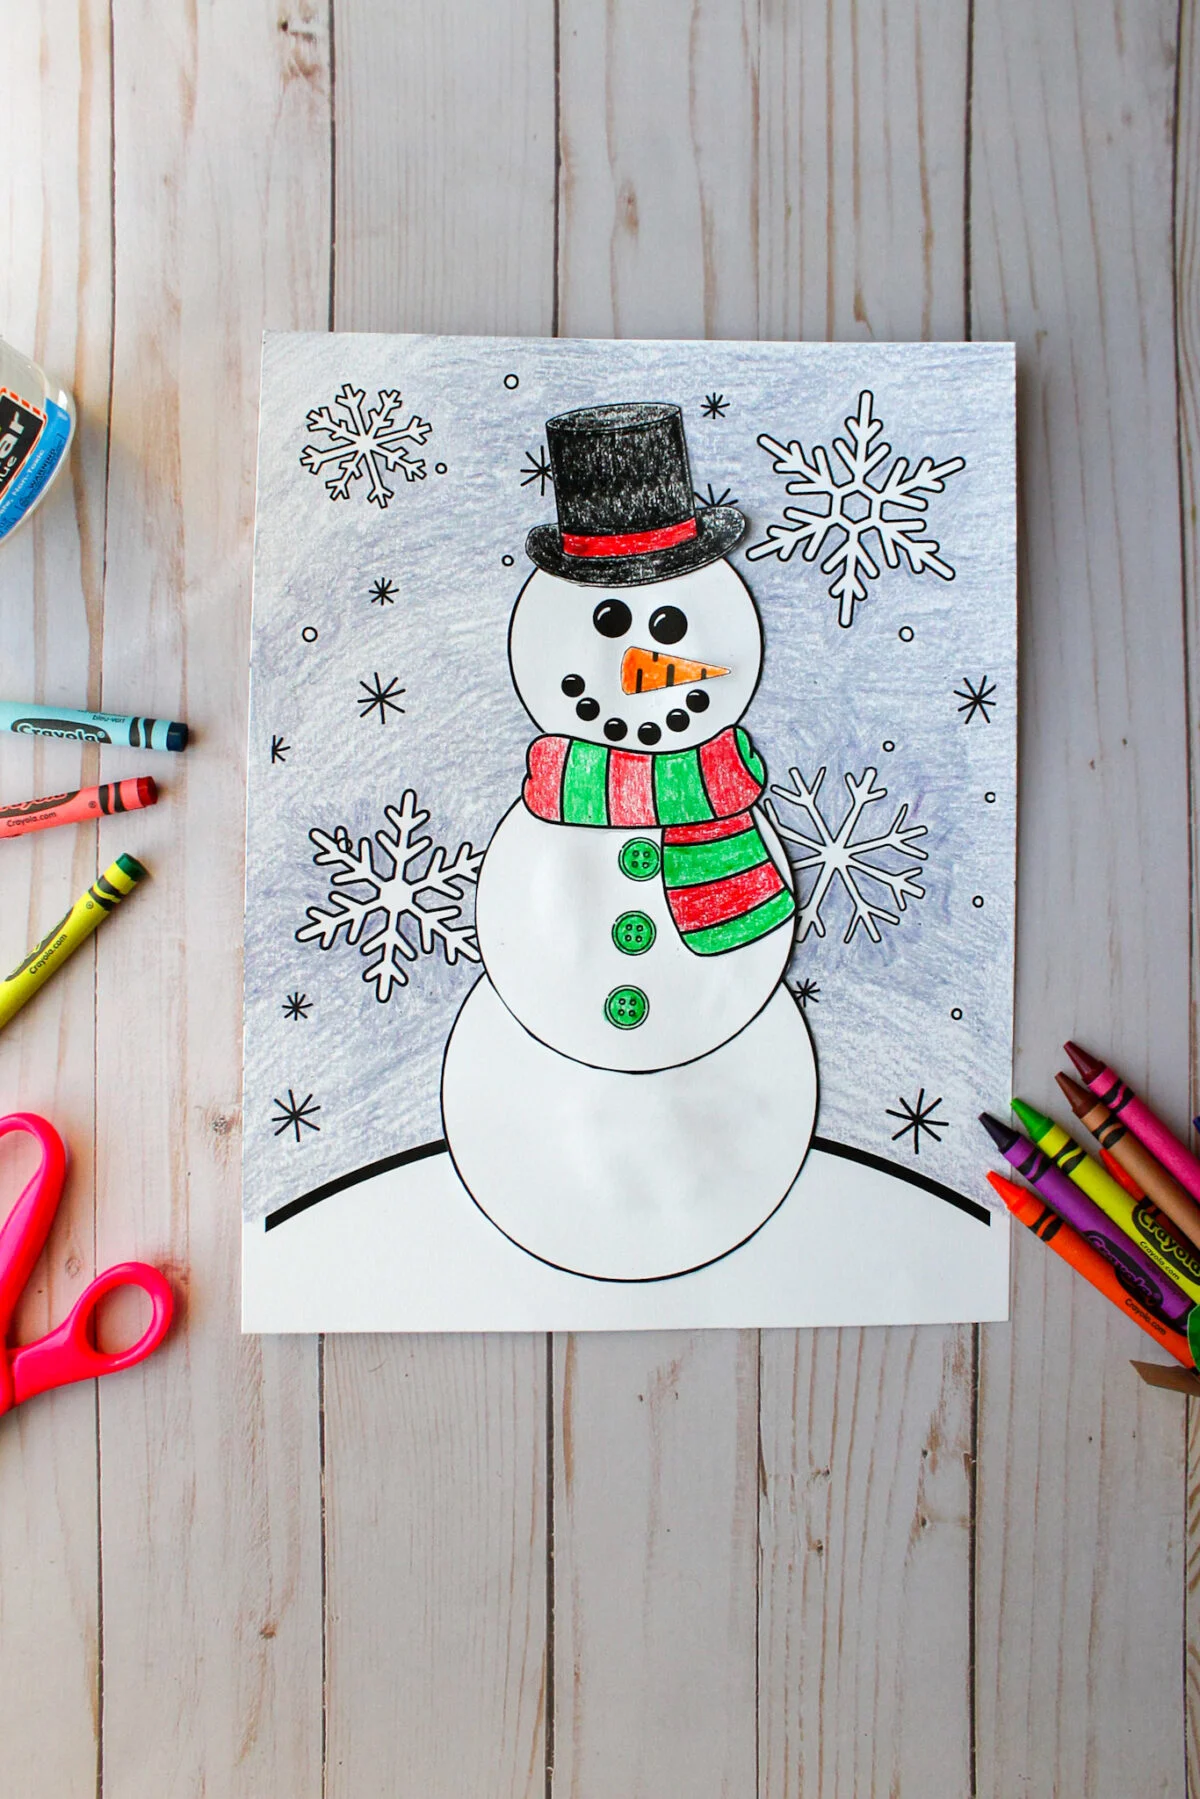 Example of the final snowman craft